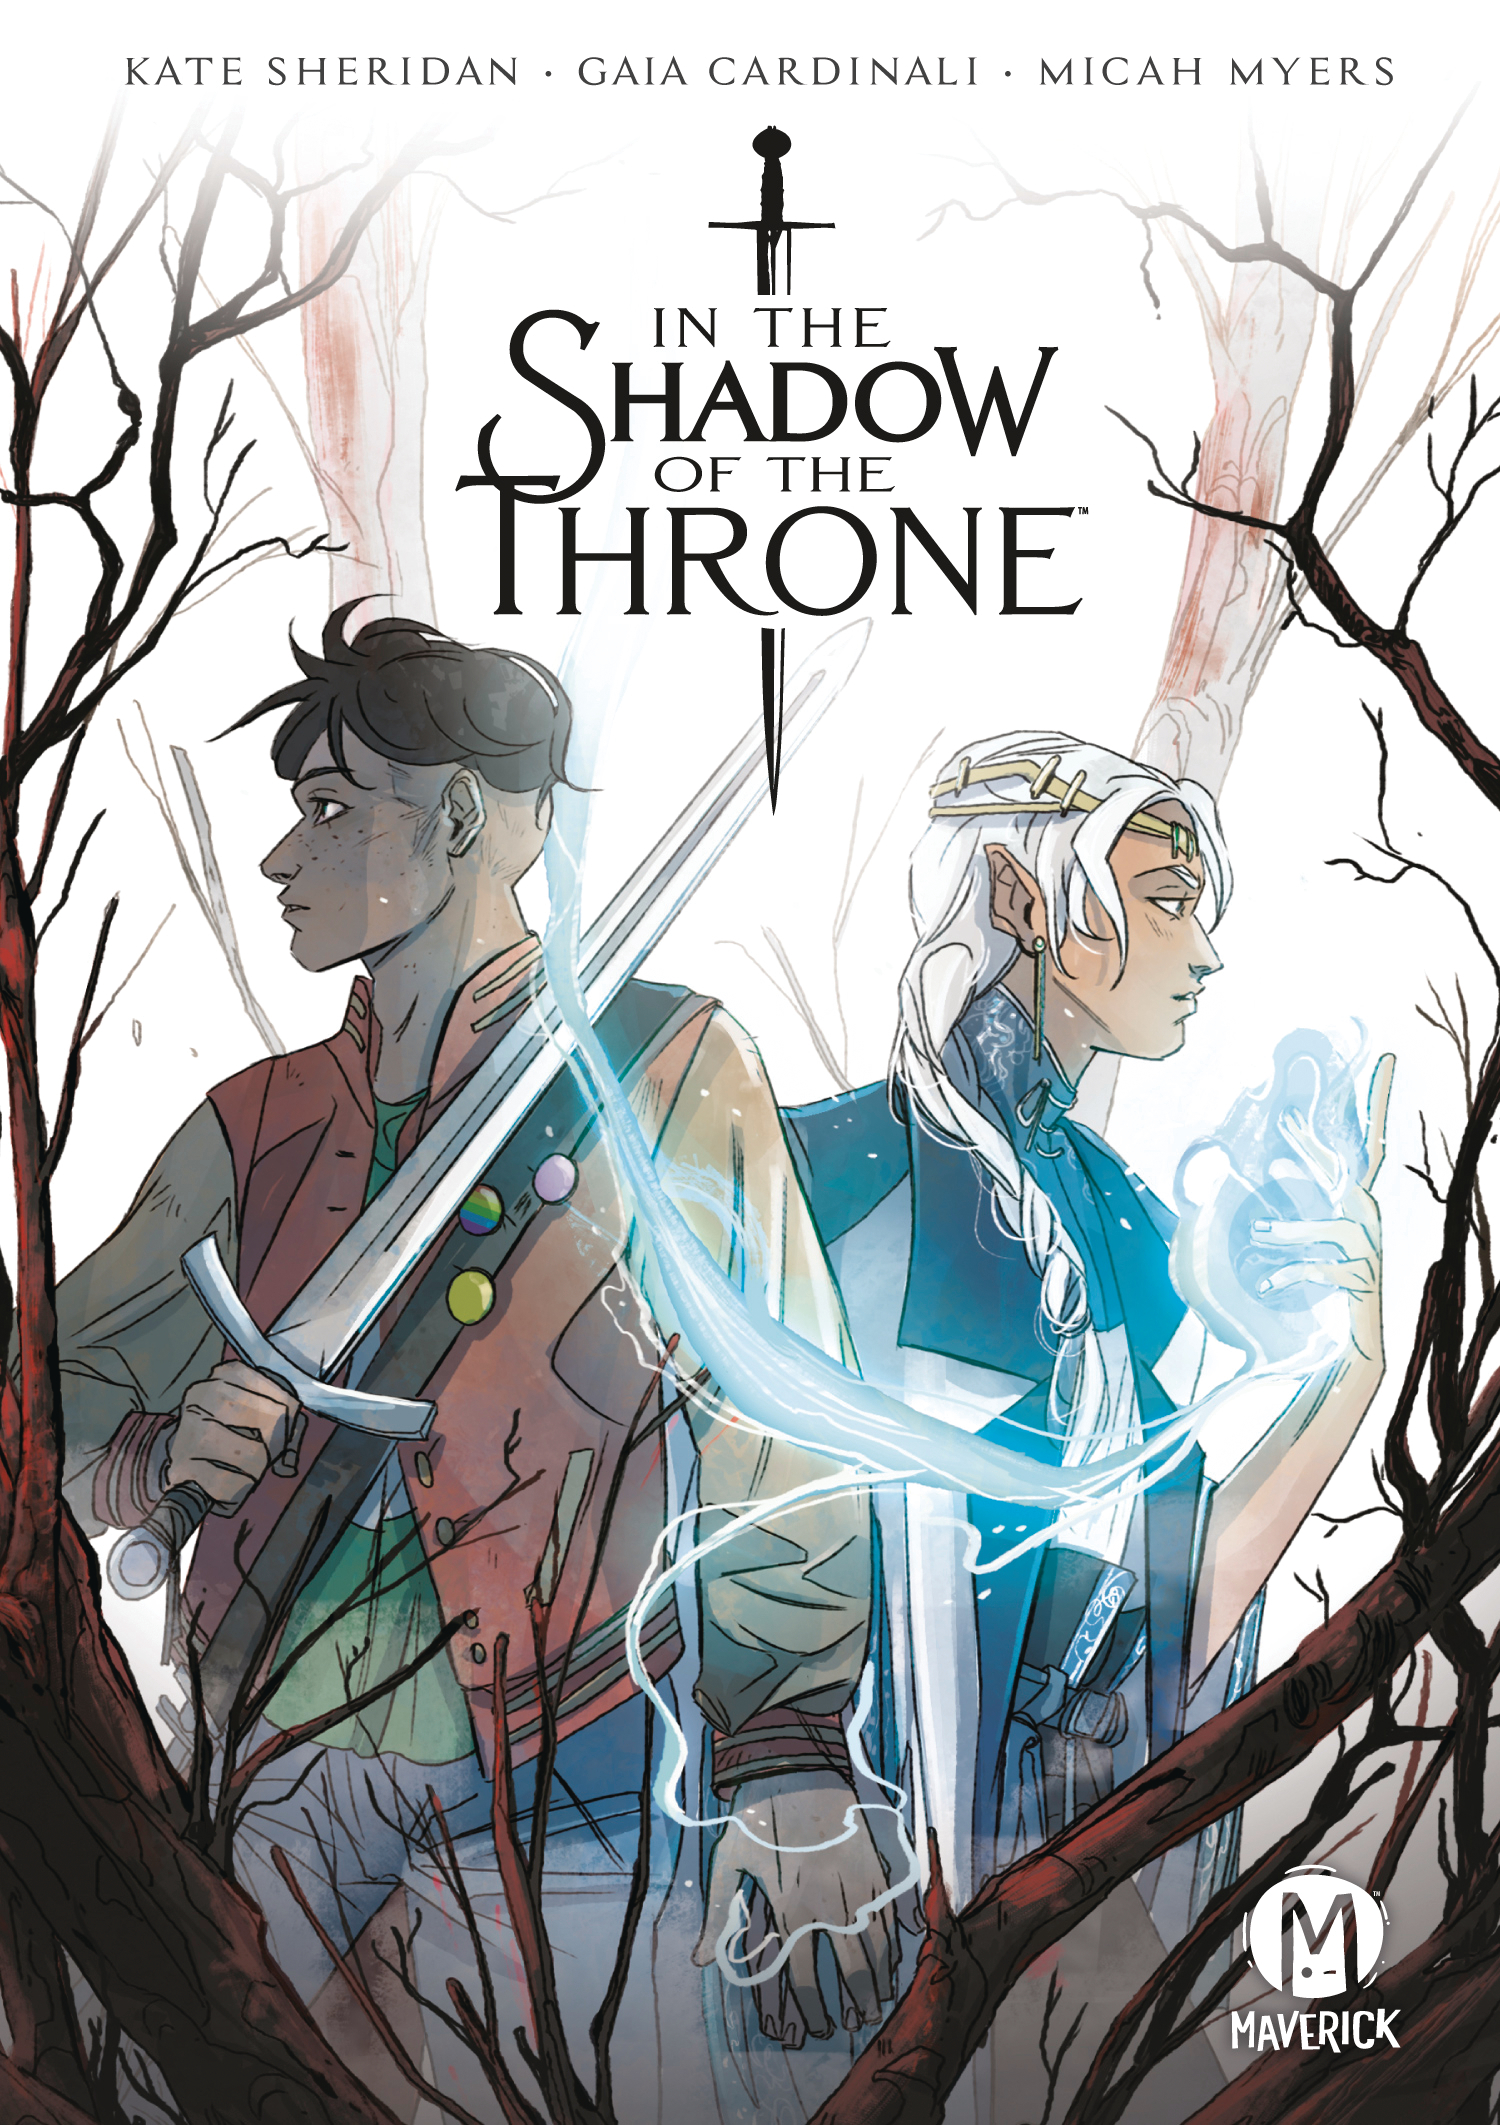 In the Shadow of the Throne Original Graphic Novel